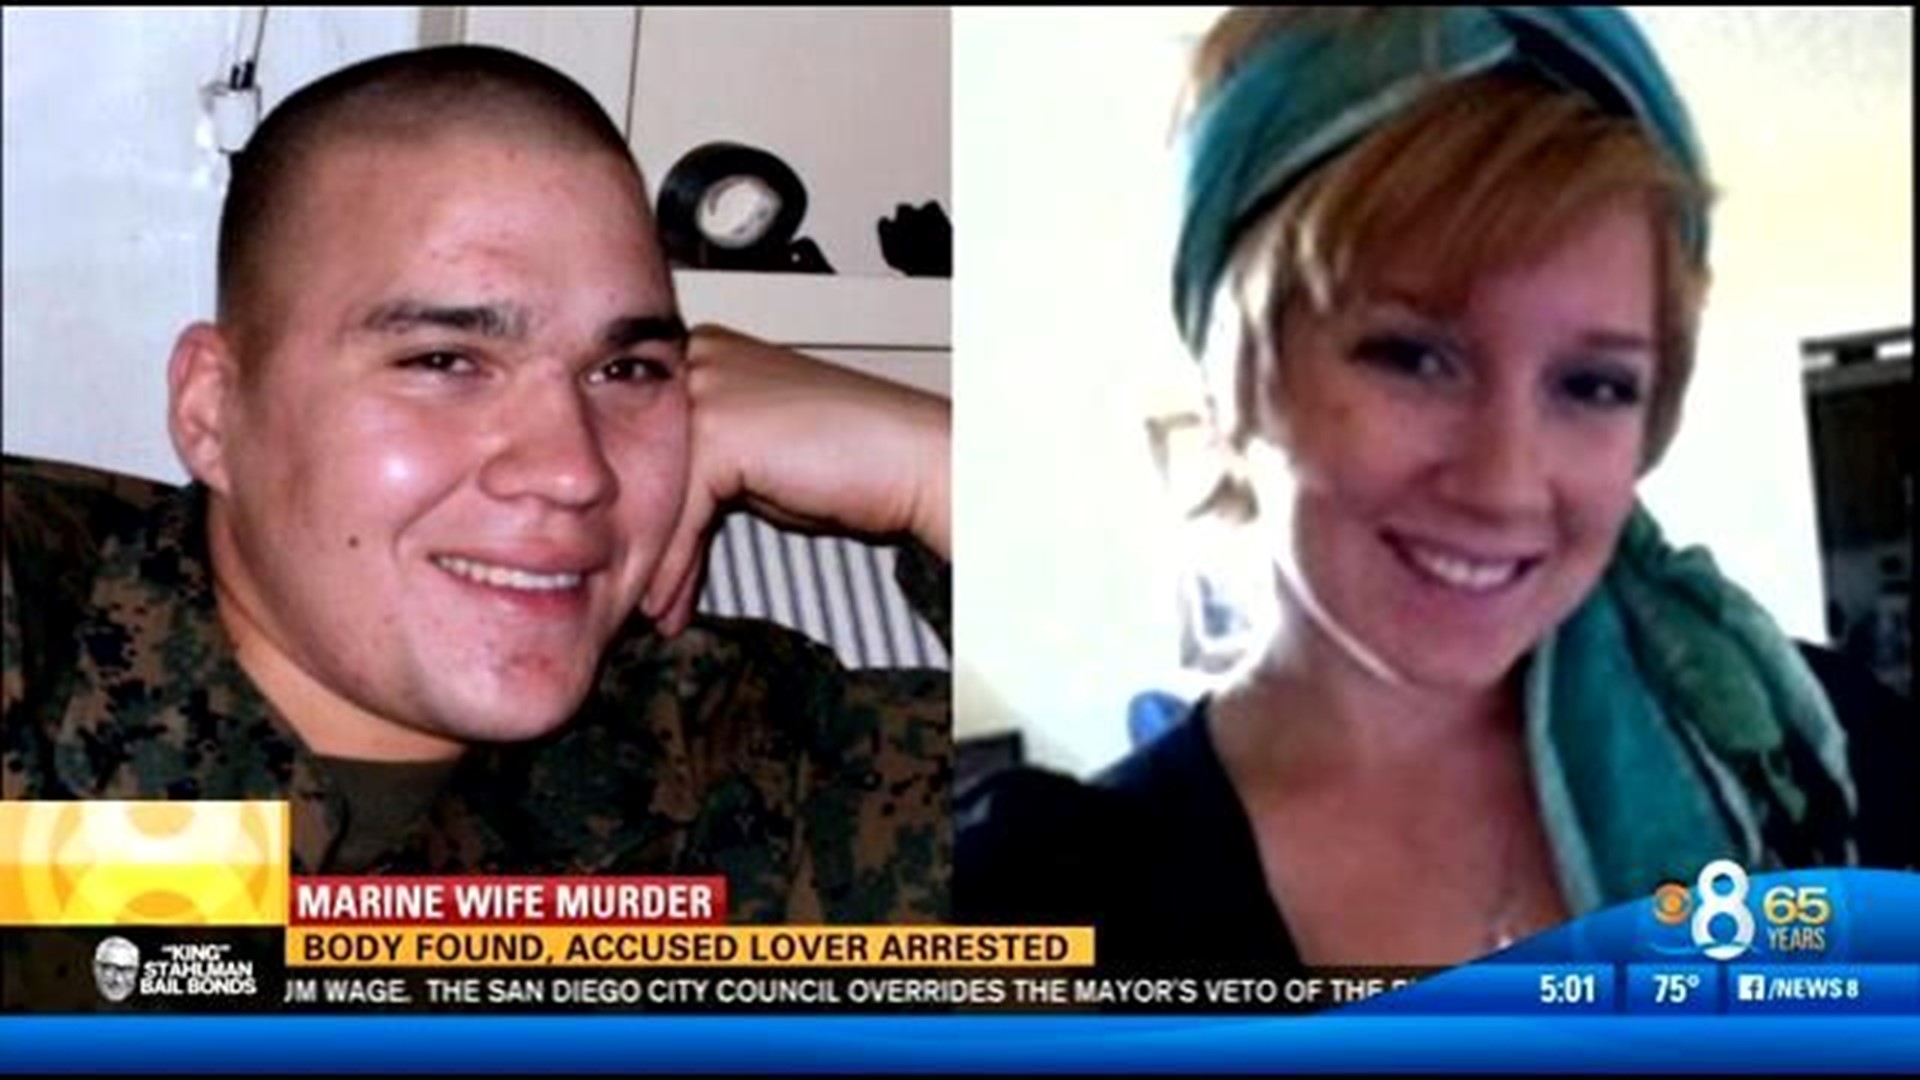 Body of missing Marine wife Erin Corwin found; alleged lover arrested |  